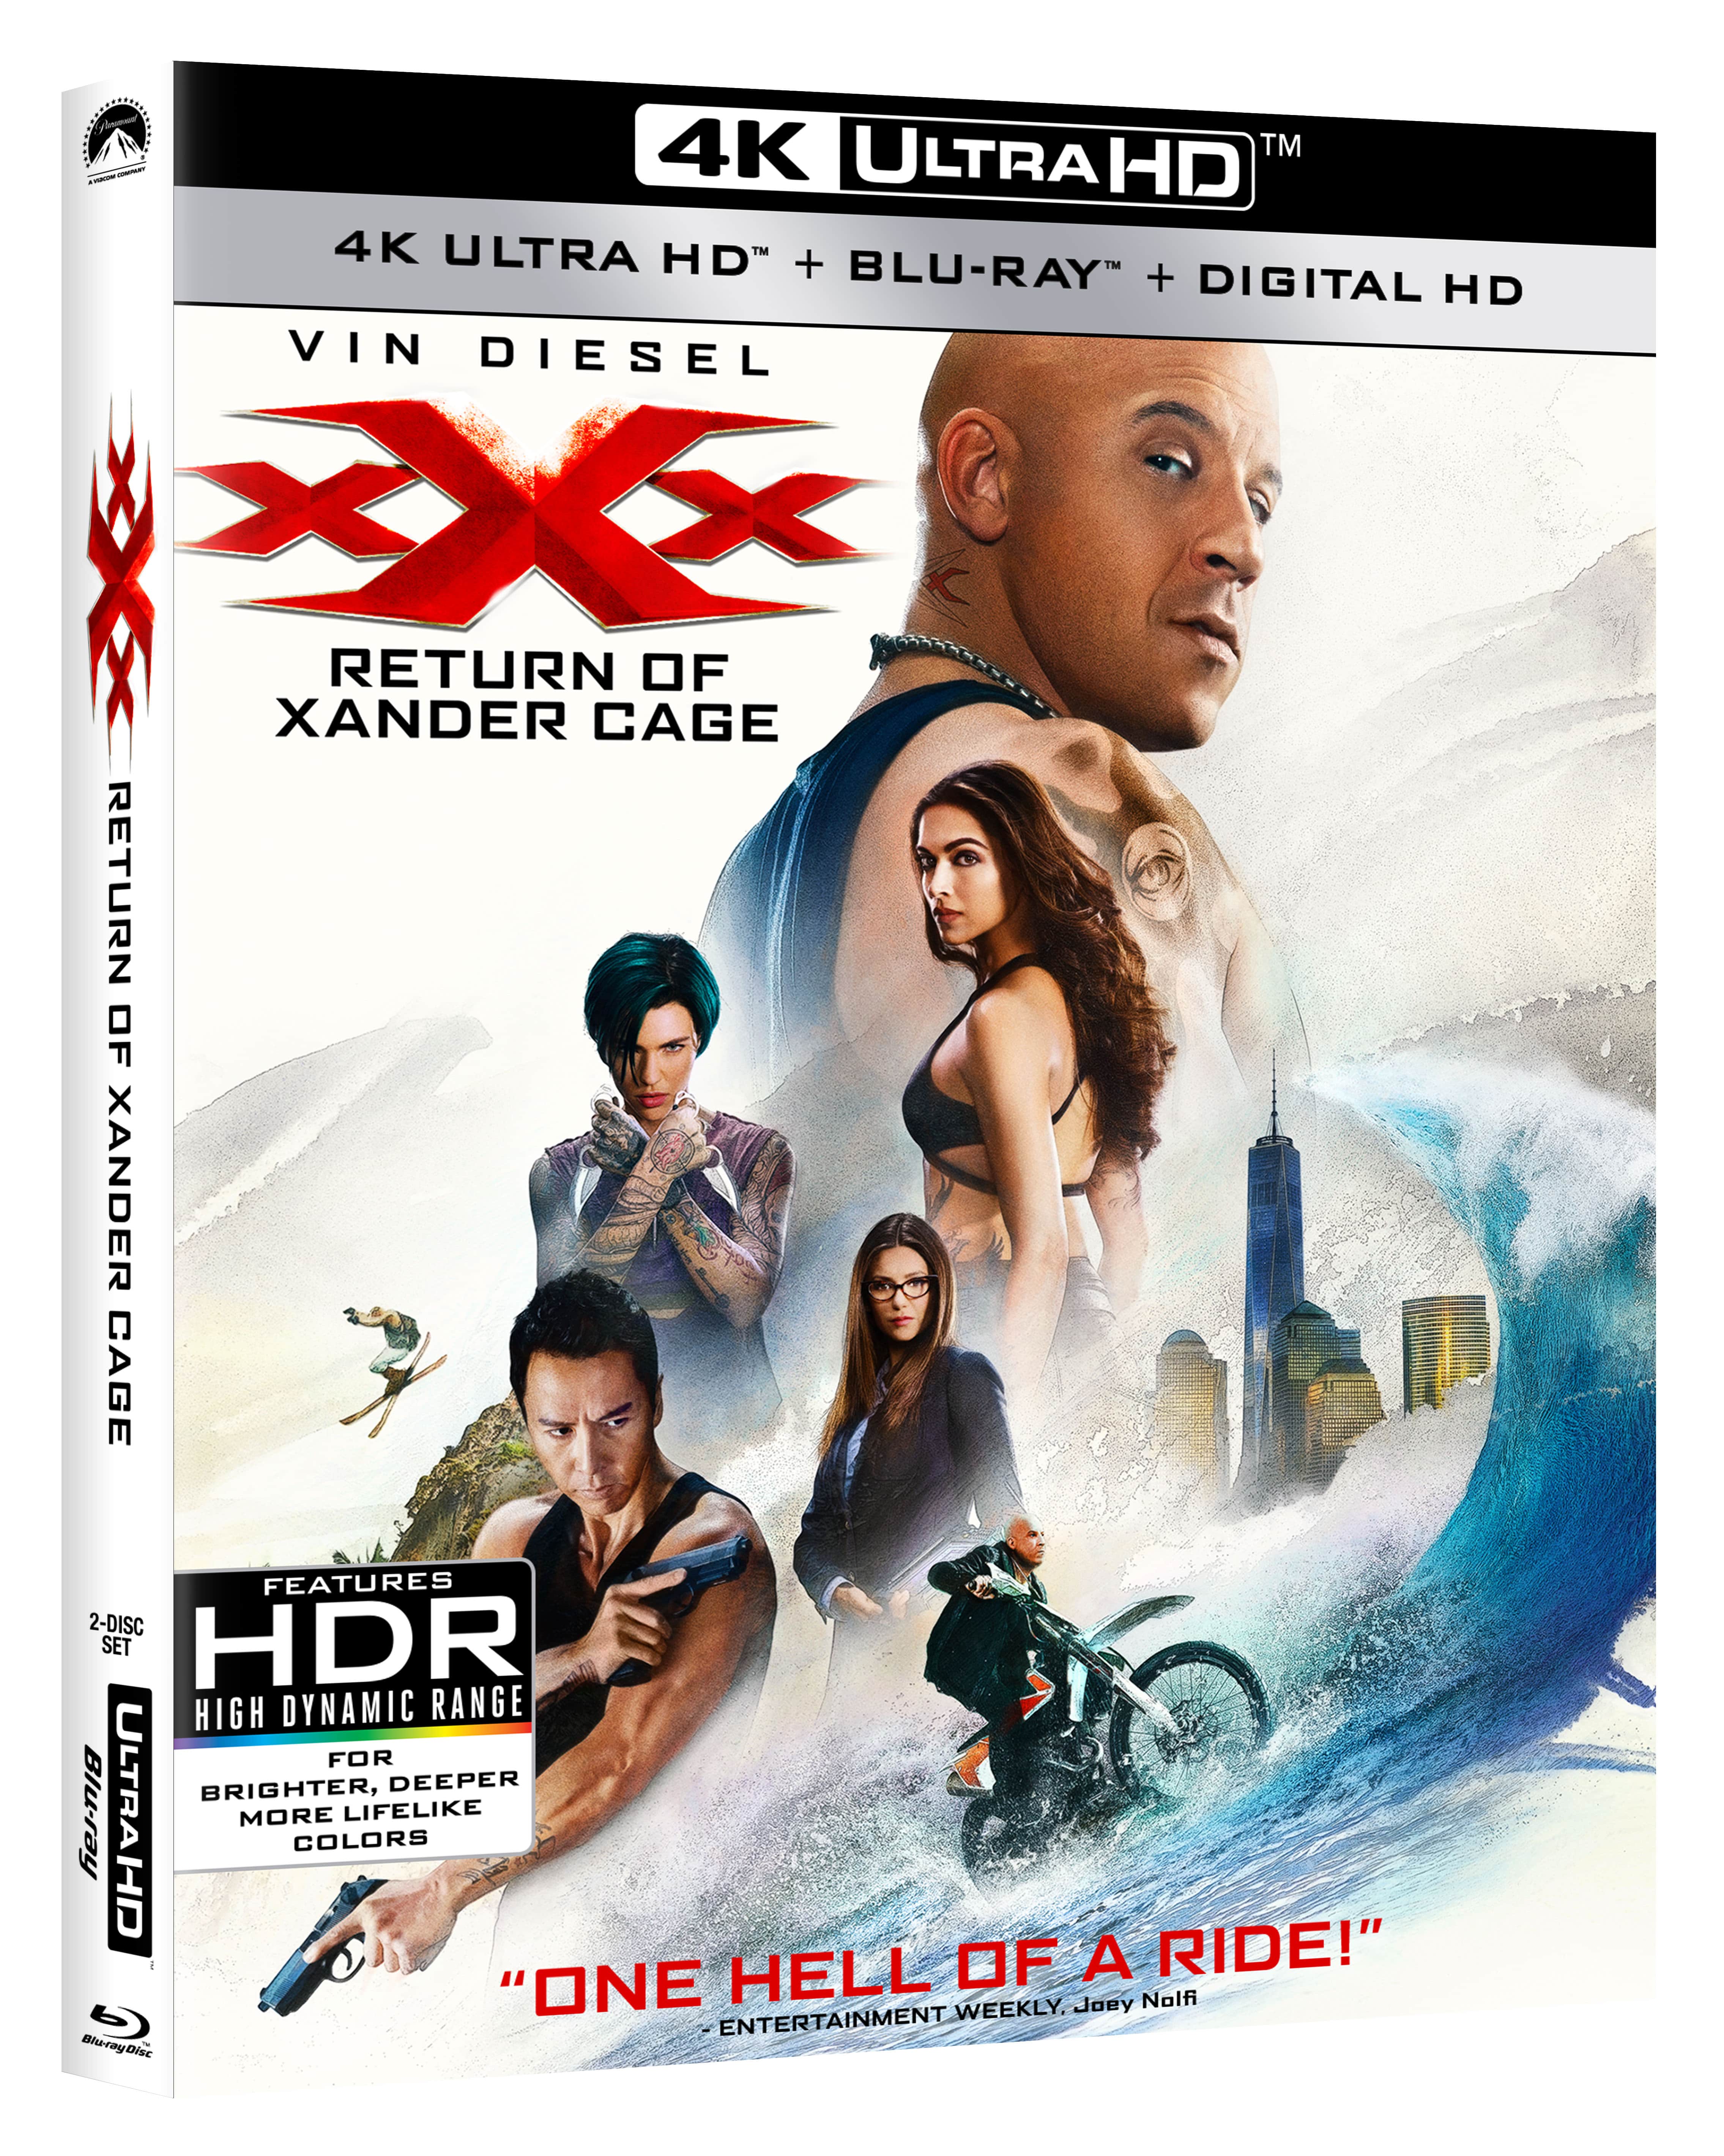 xXx: The Return of Xander Cage - Movie Review